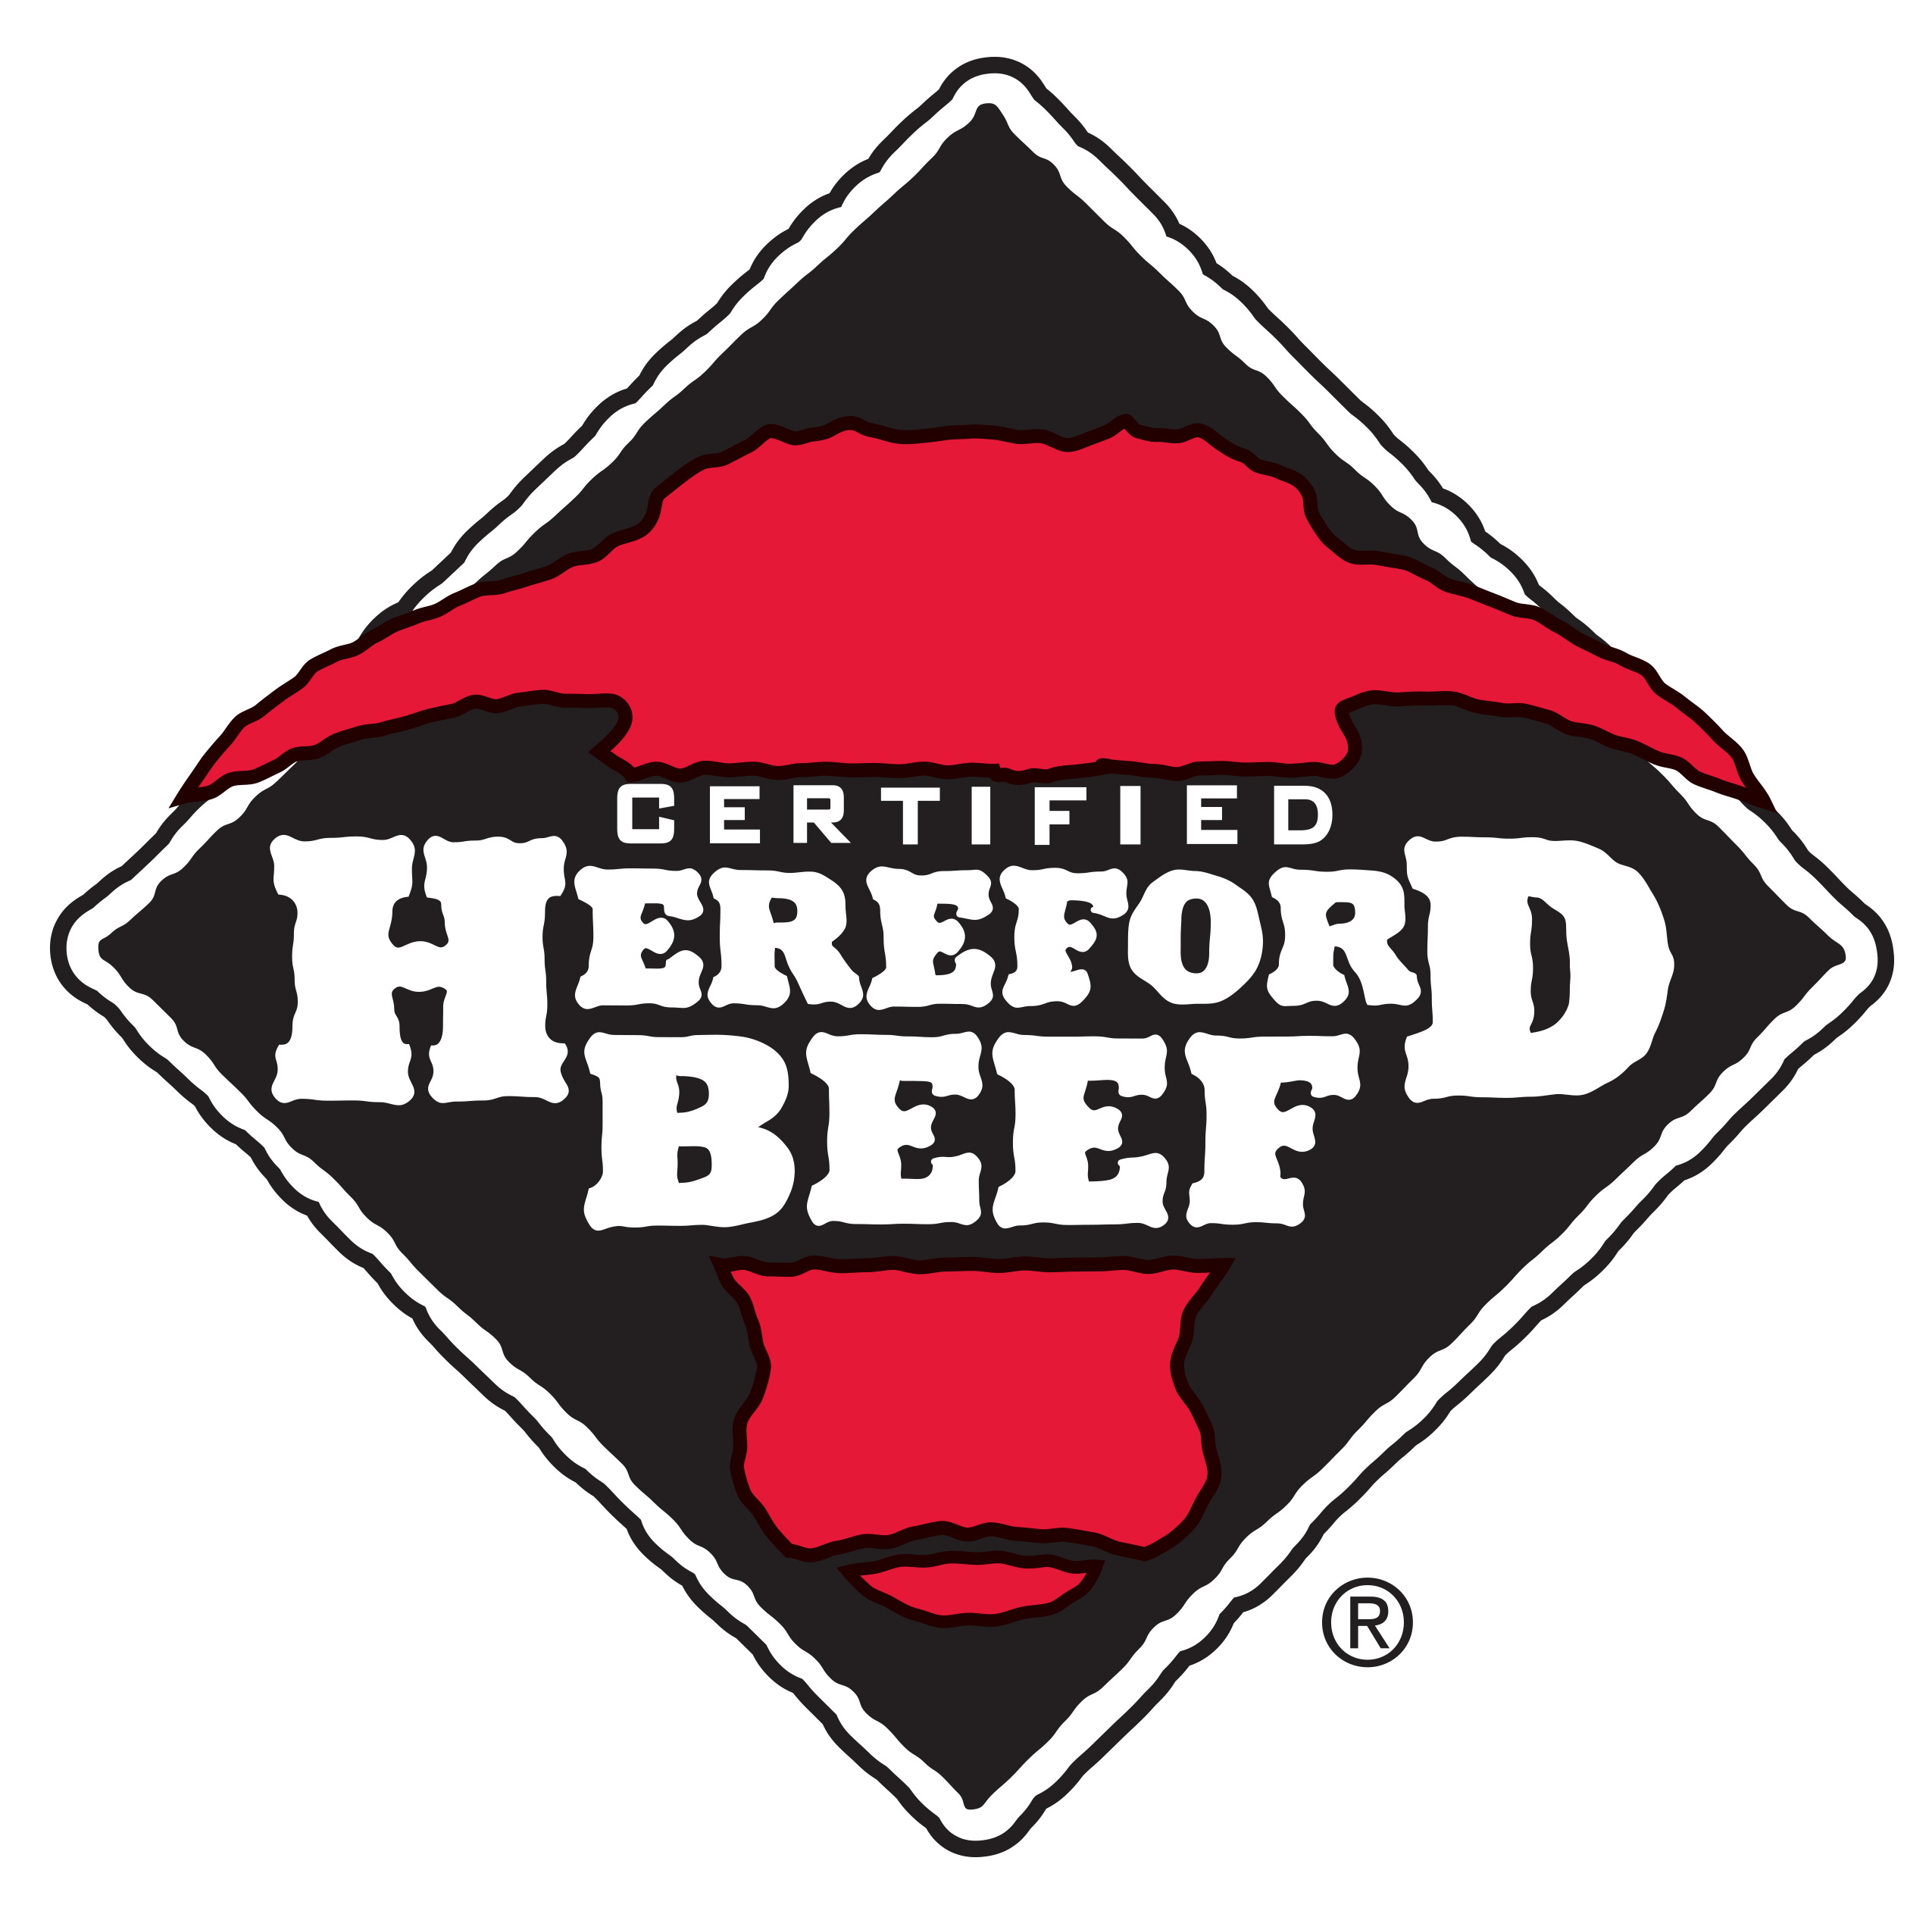 Certified Hereford Beef: What do you know?